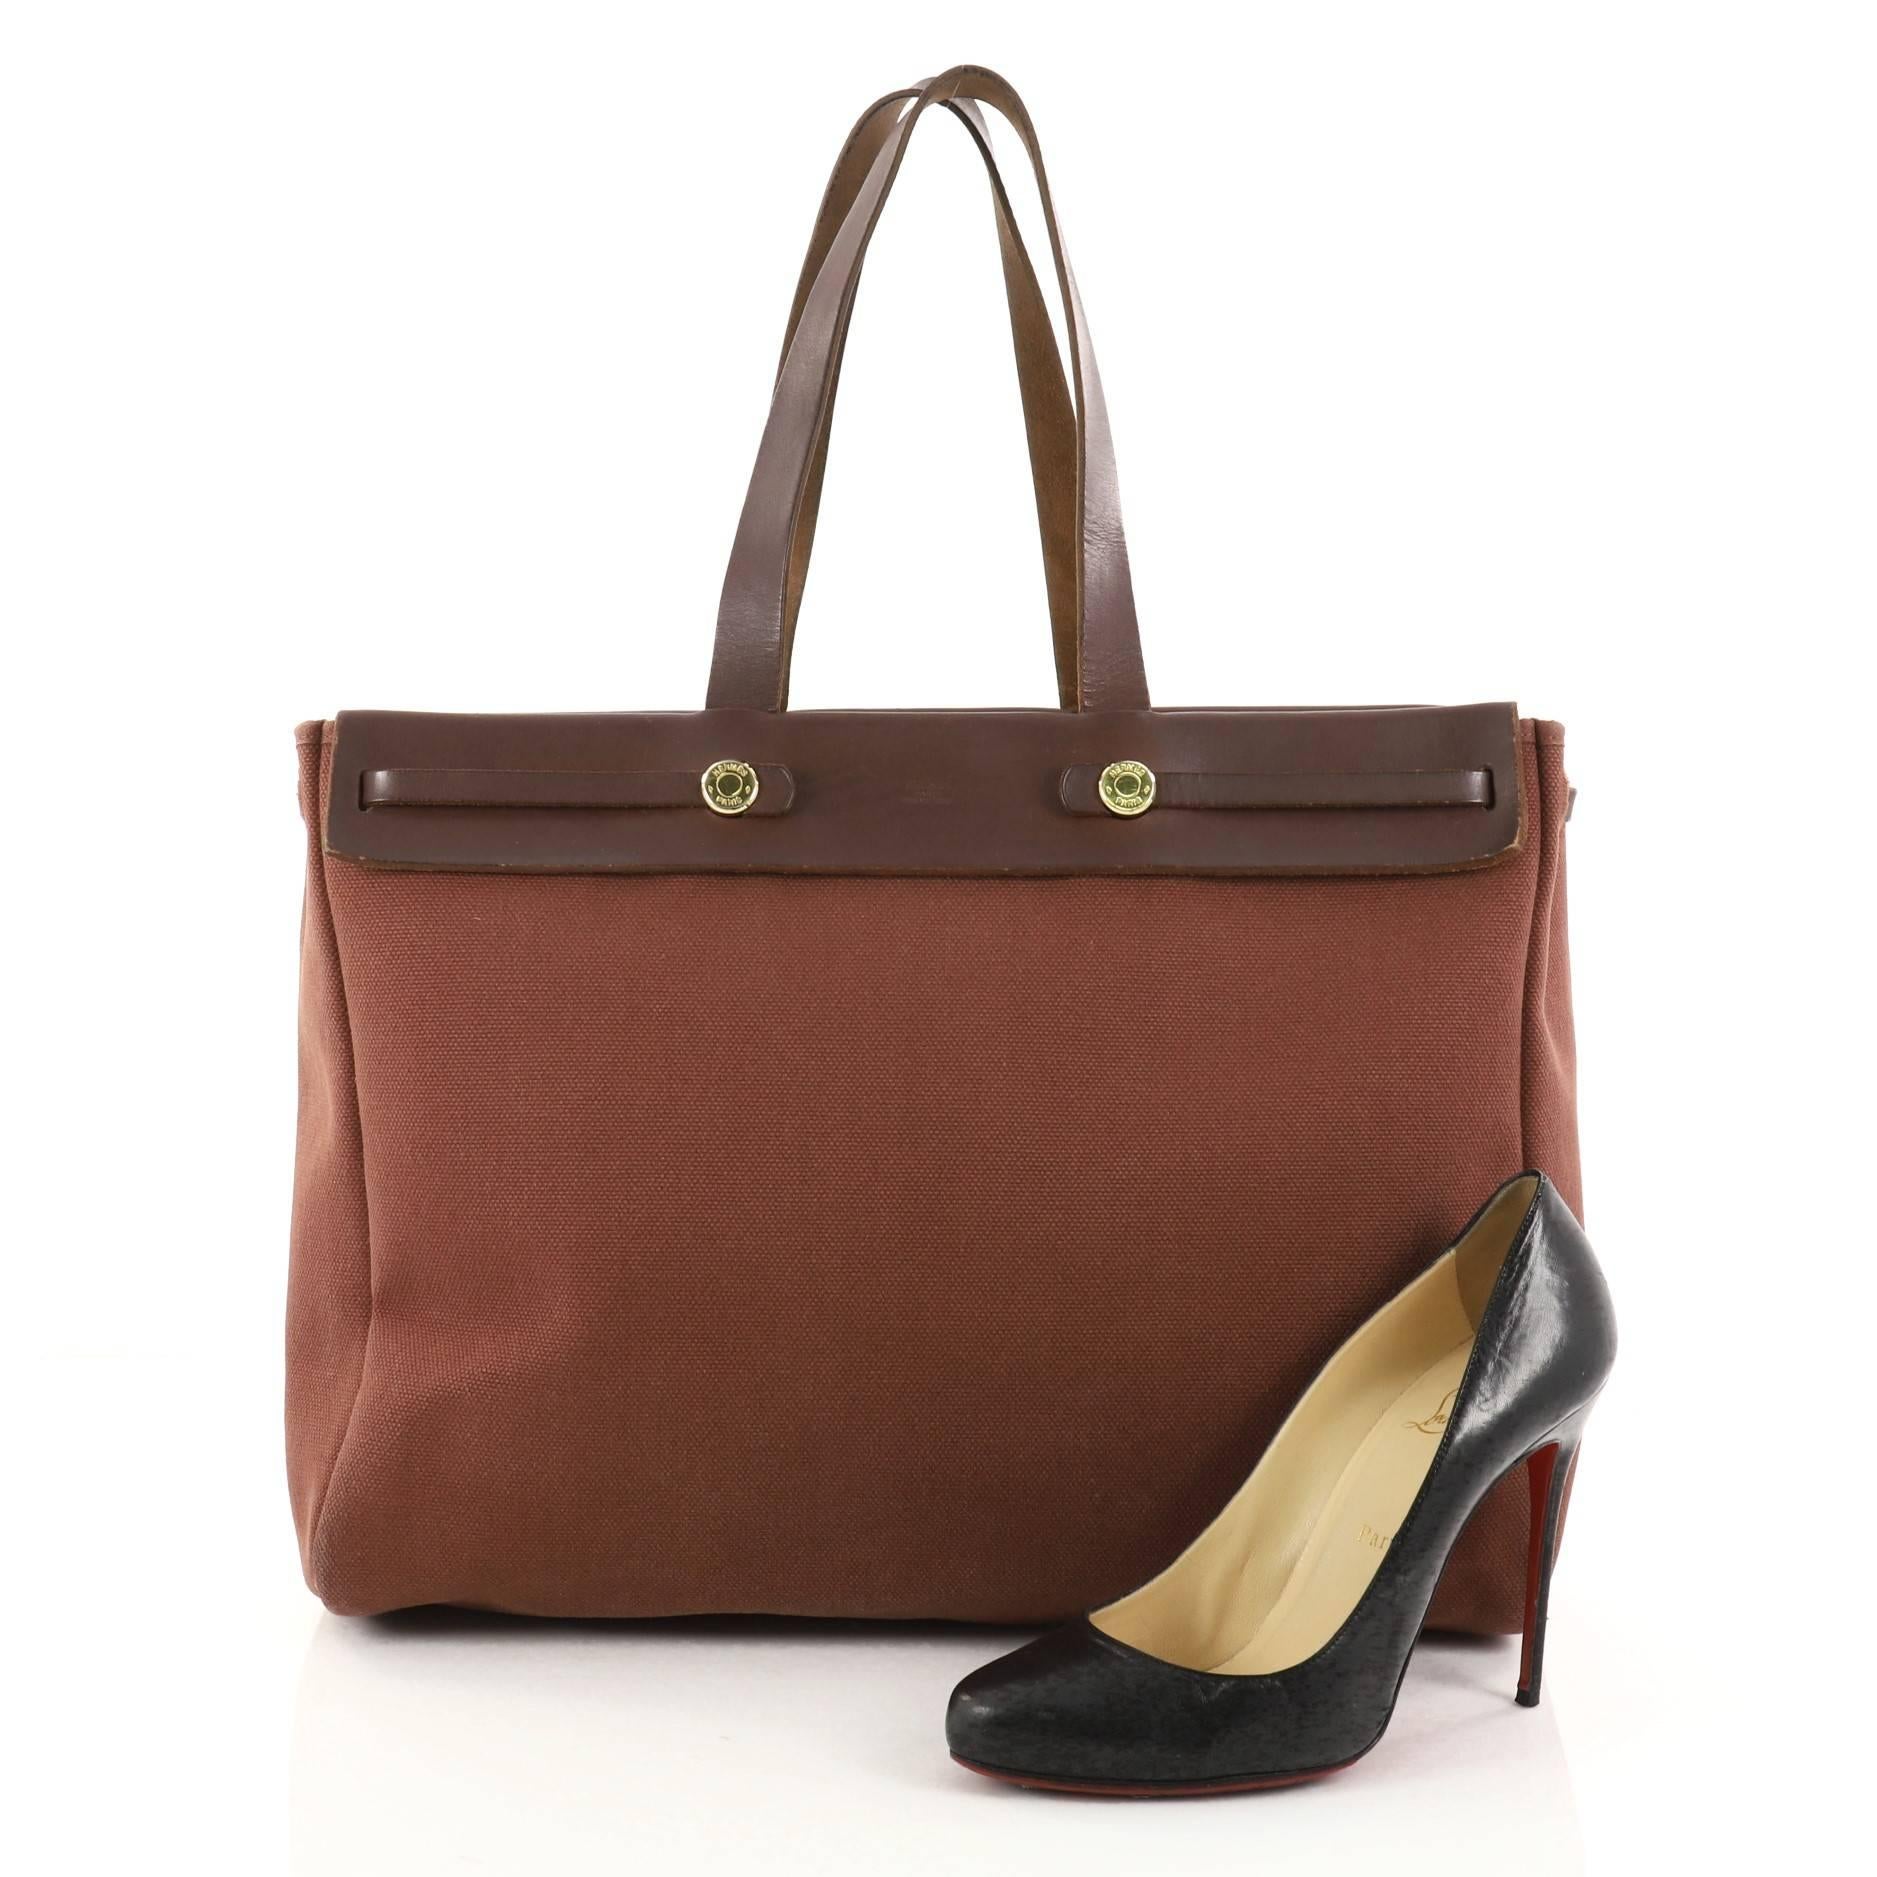 This authentic Hermes Herbag Cabas Toile and Leather MM is a fabulously functional, lightweight tote made for everyday excursions. Constructed from burgundy toile and vache hunter leather, this versatile tote features a flat leather top handle, gold